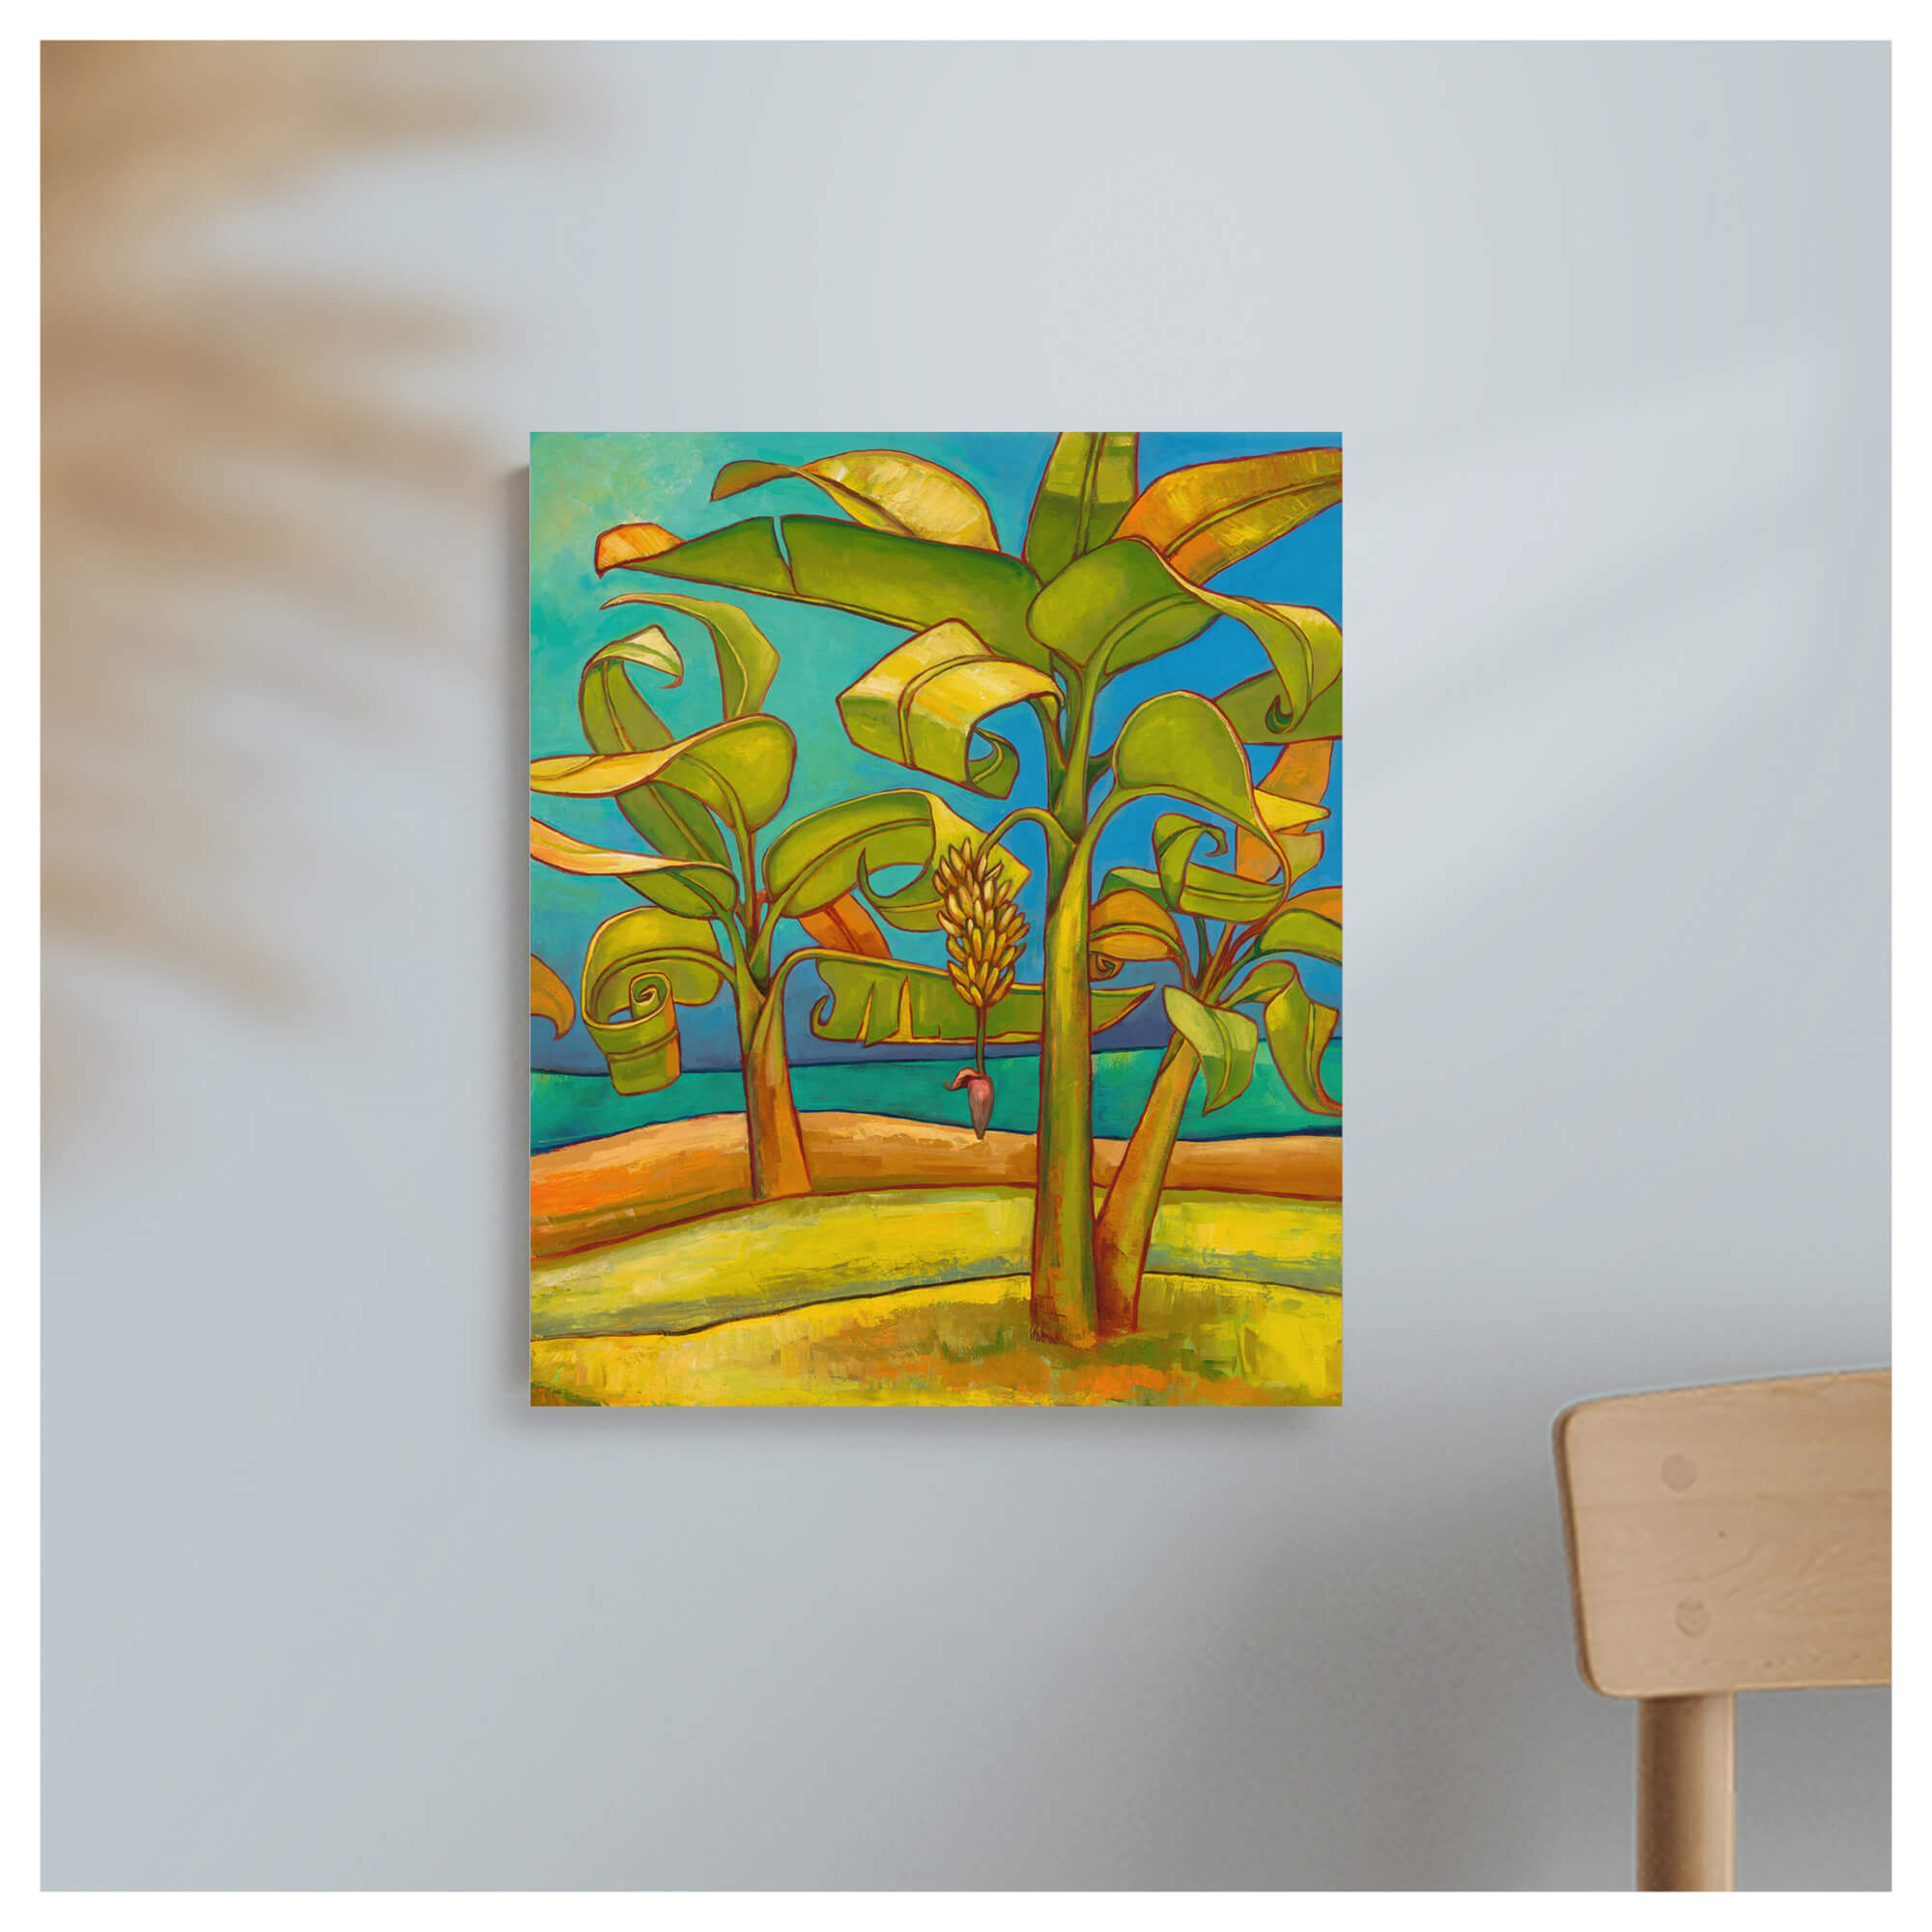 Yellow and teal hued painting with banana trees by Hawaii artist Colin Redican